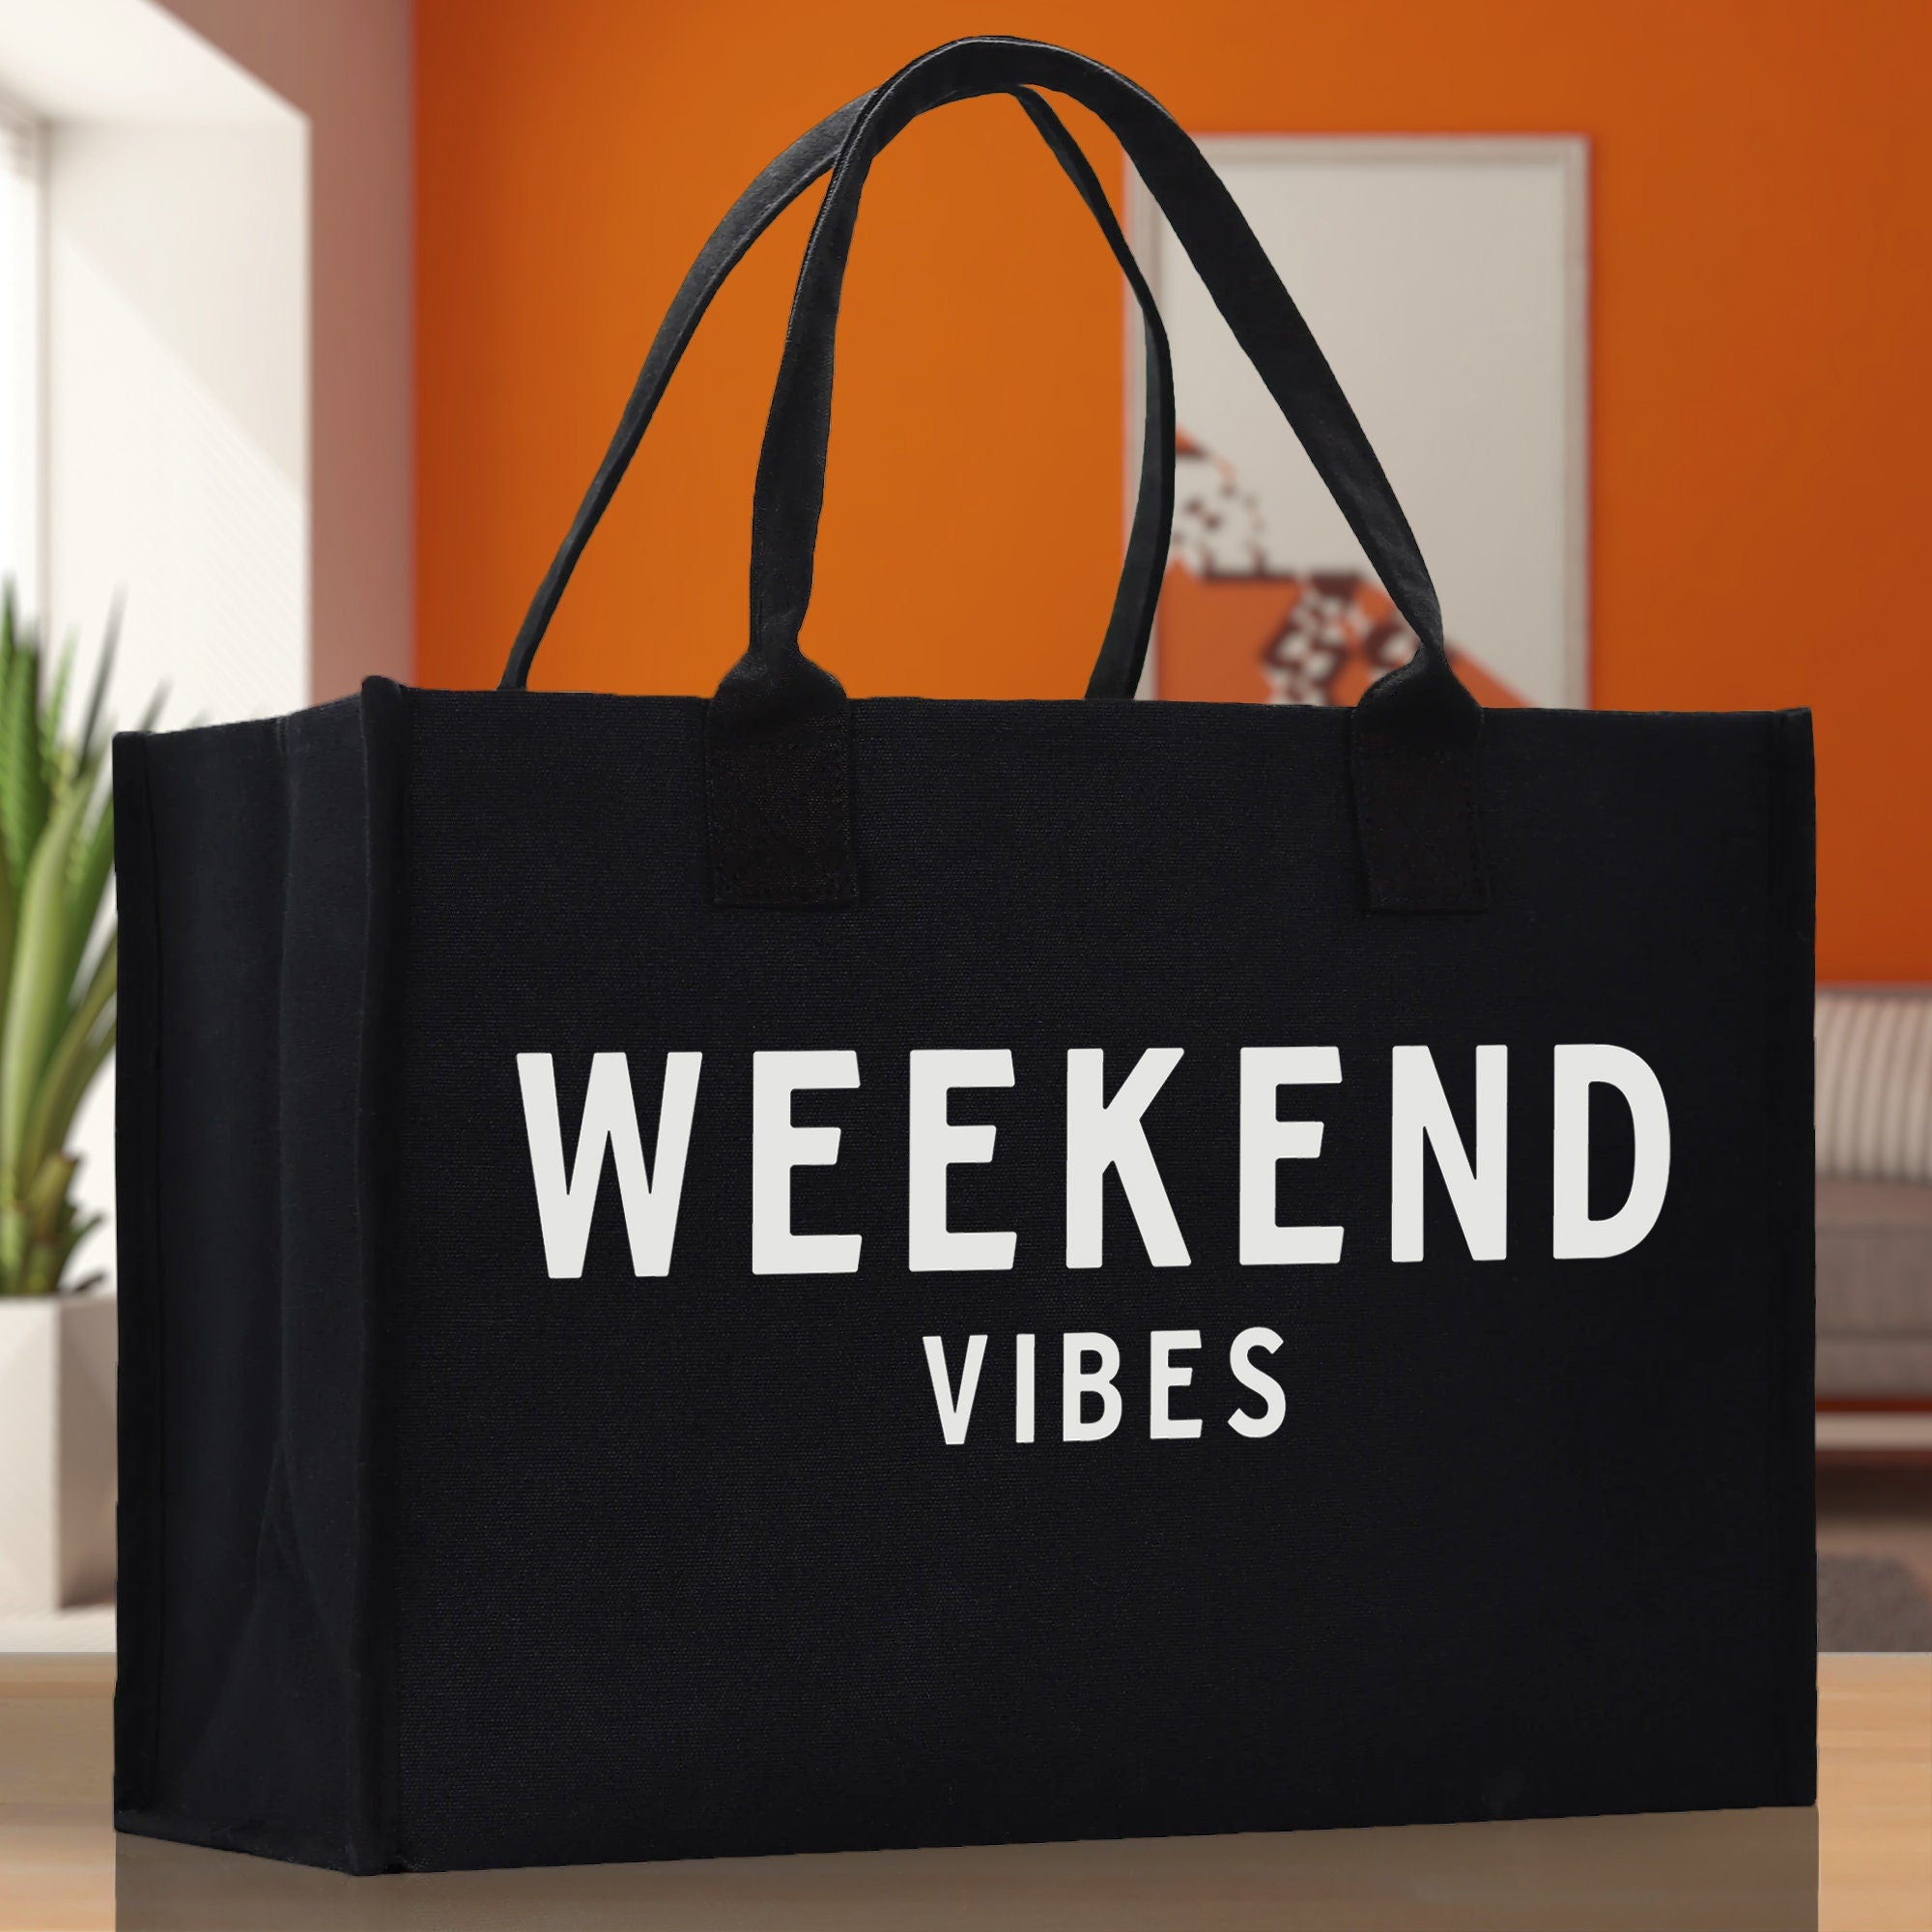 Weekend Vibes Cotton Canvas Chic Beach Tote Bag Multipurpose Tote Weekender Tote Gift for Her Outdoor Tote Vacation Tote Large Beach Bag